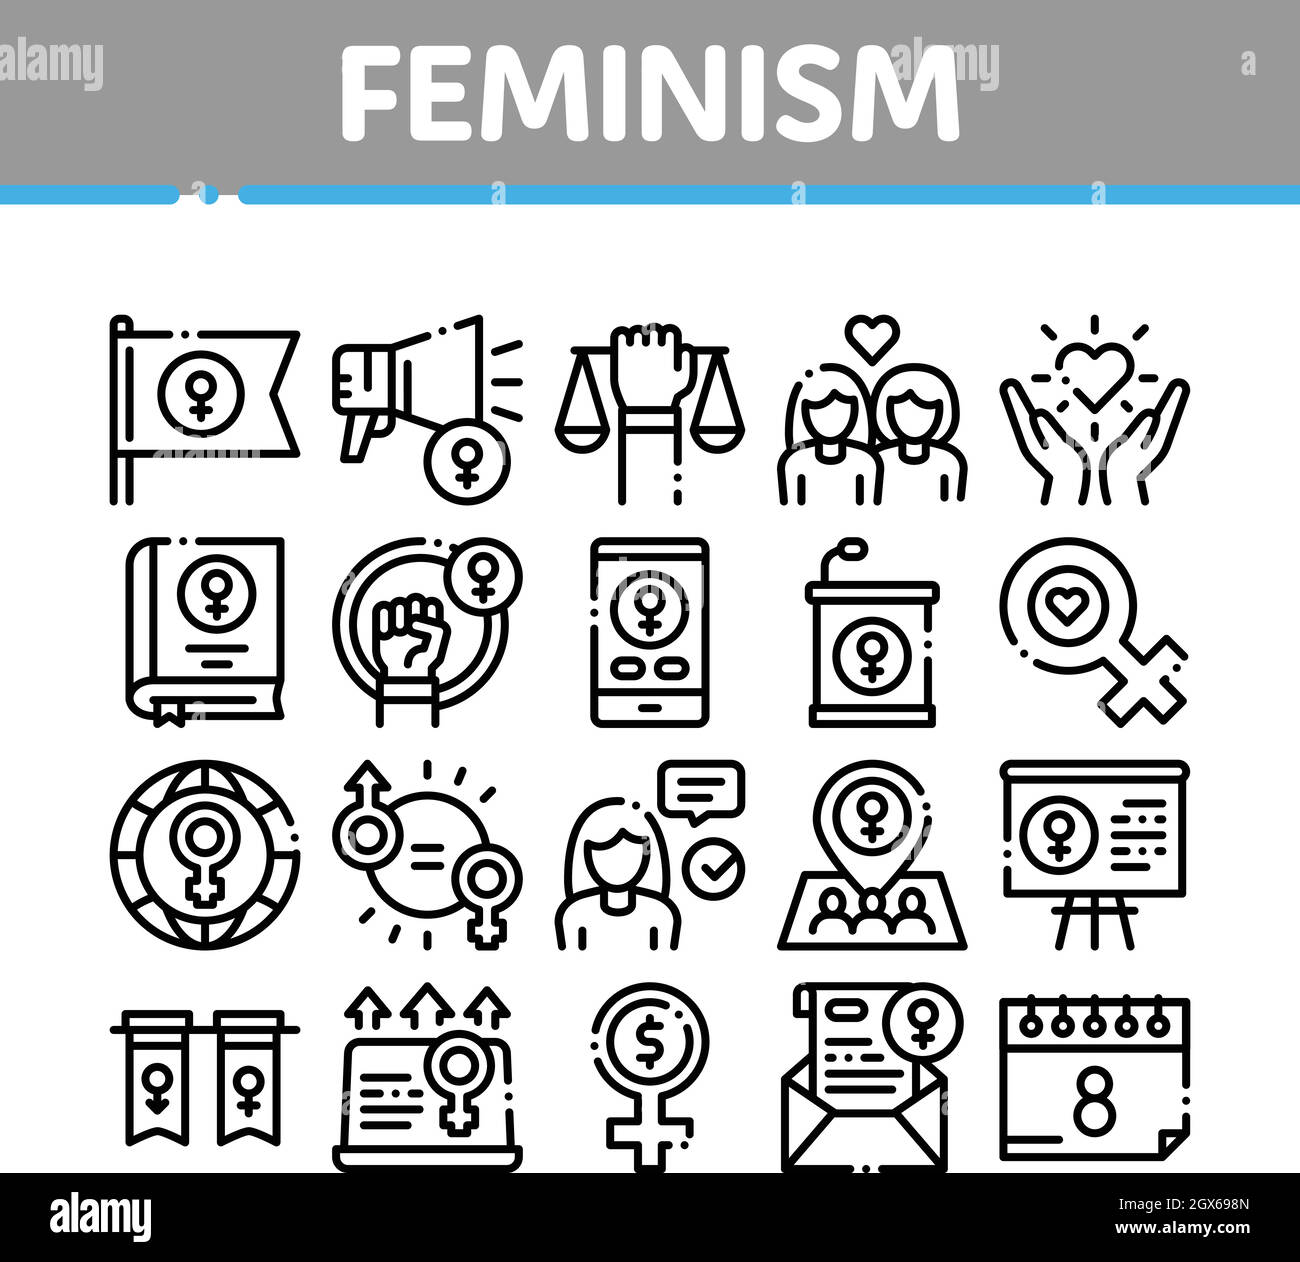 Feminism Woman Power Collection Icons Set Vector Stock Vector